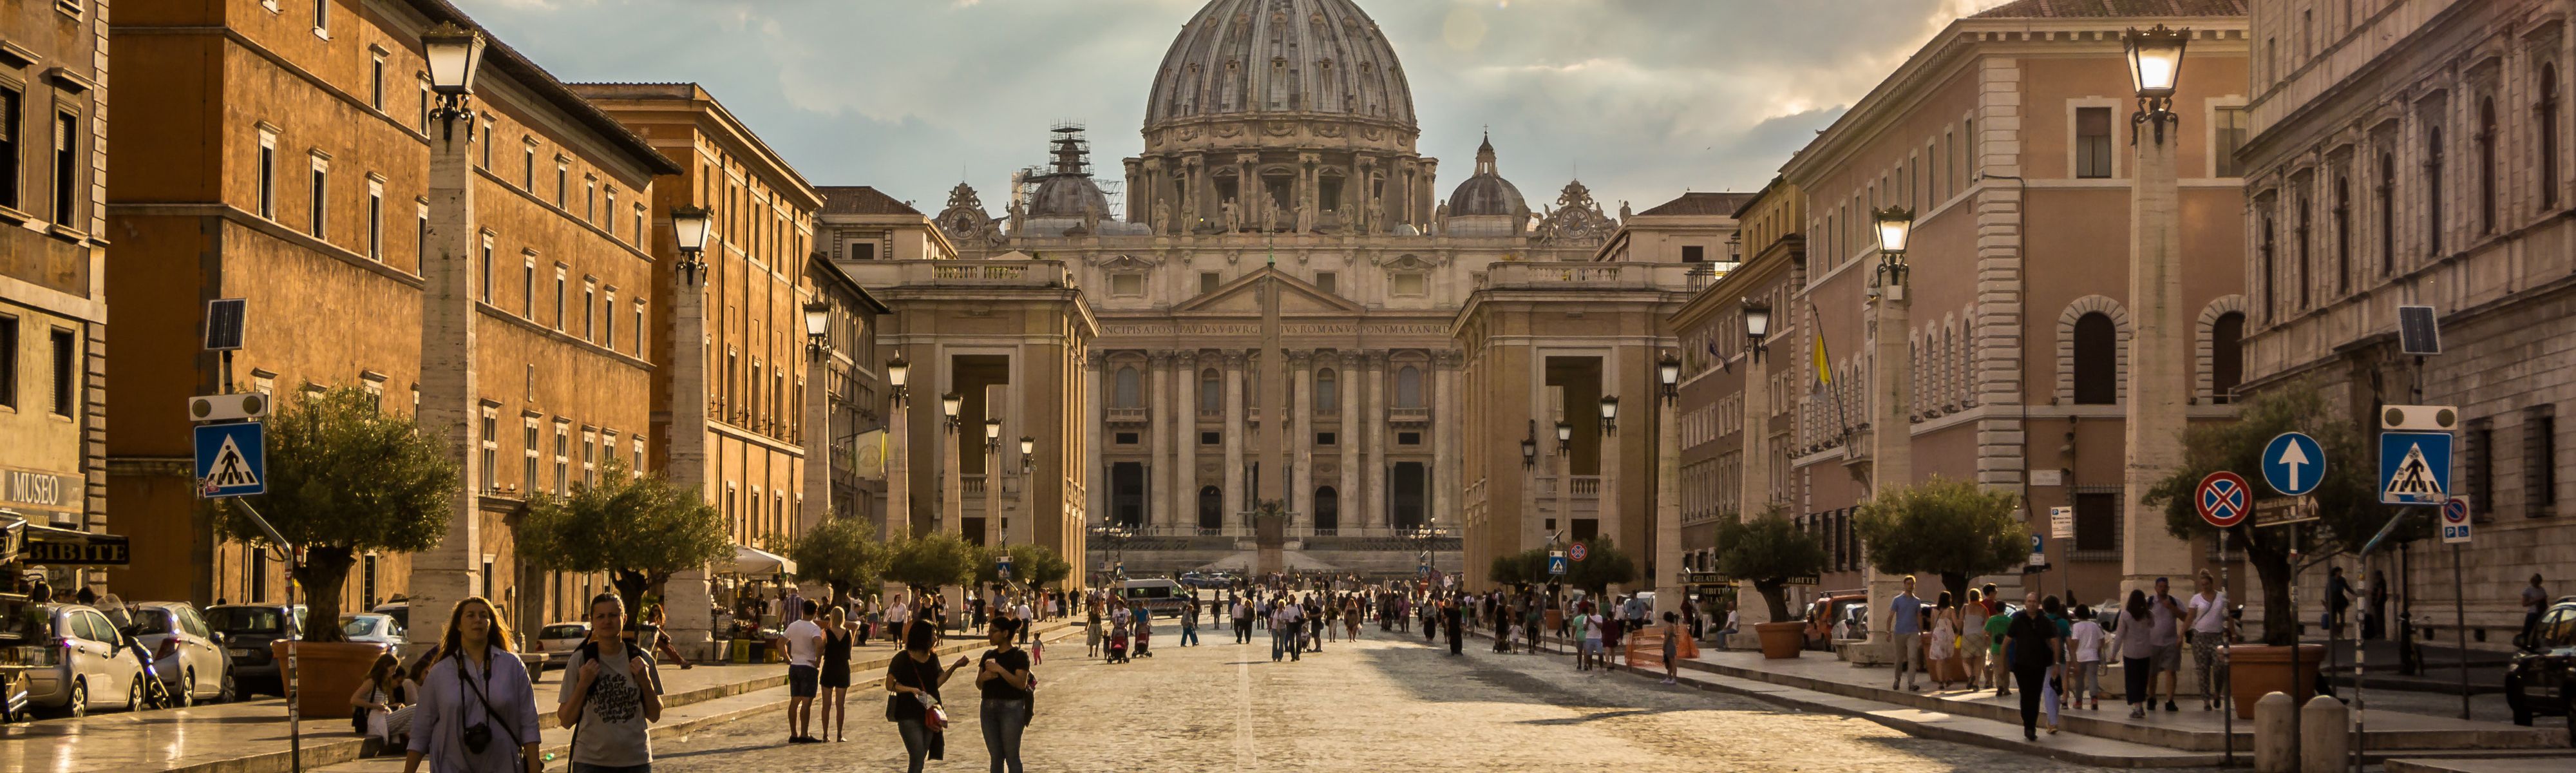 people walking in front of the vatican in rome italy